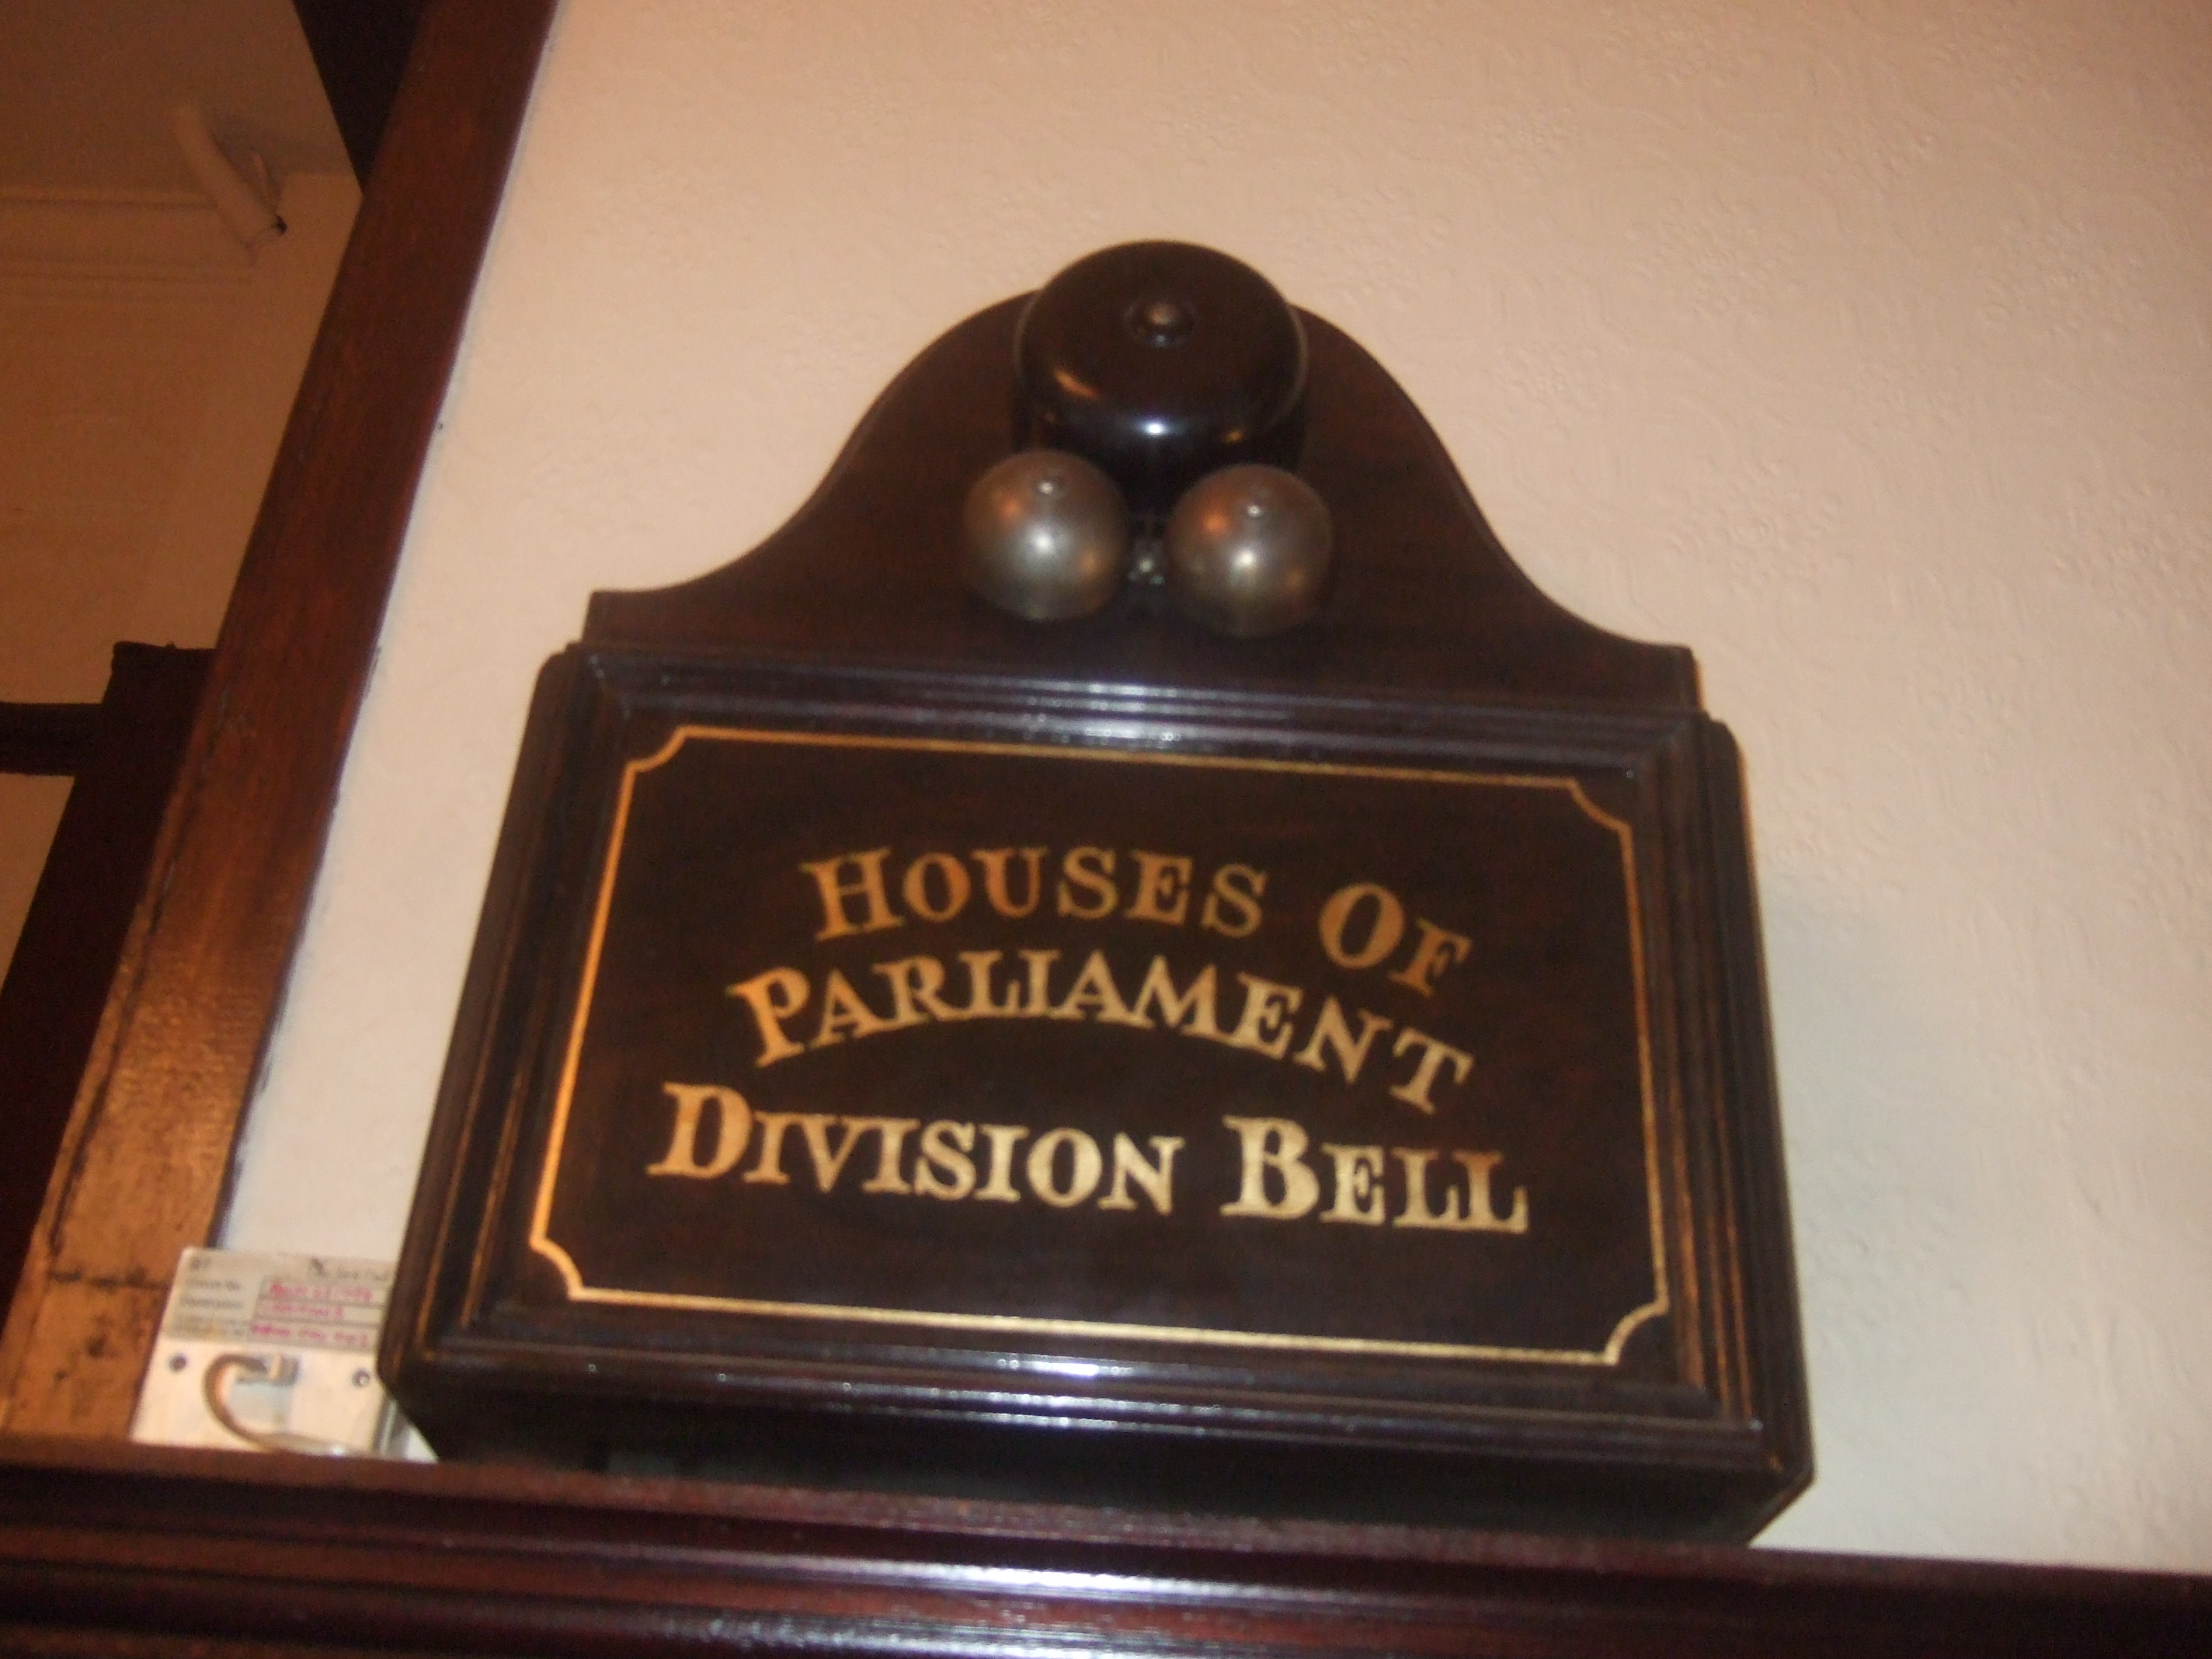 This is a picture of the Houses of Parliament Division Bell